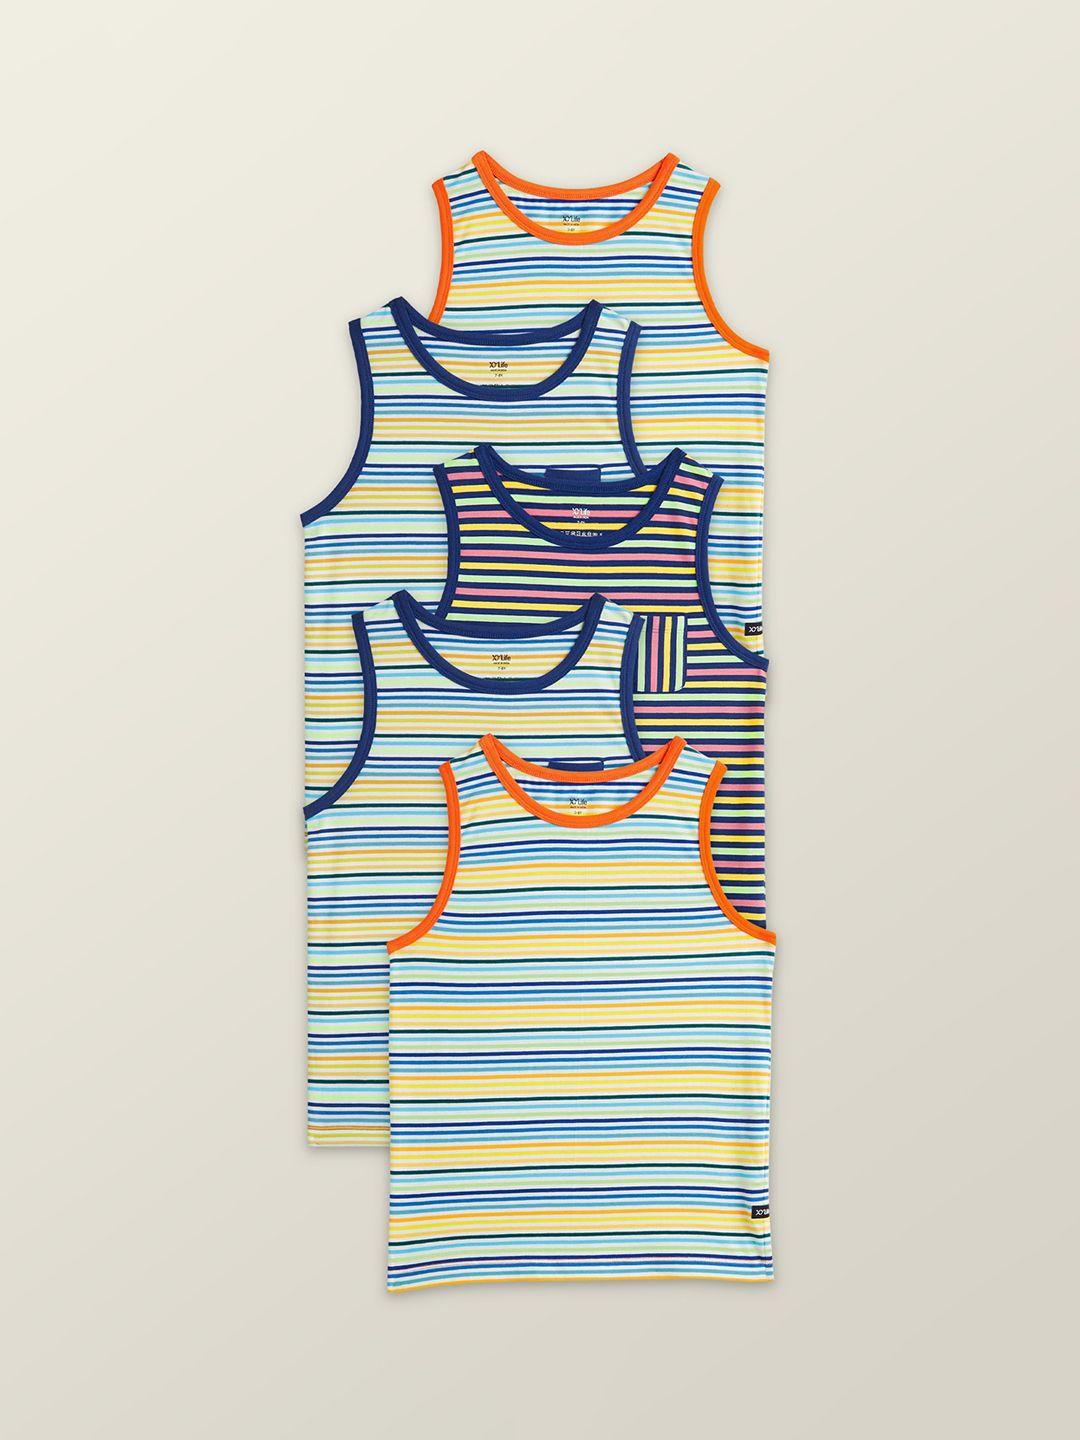 xy life boys pack of 5 striped printed combed cotton innerwear vests